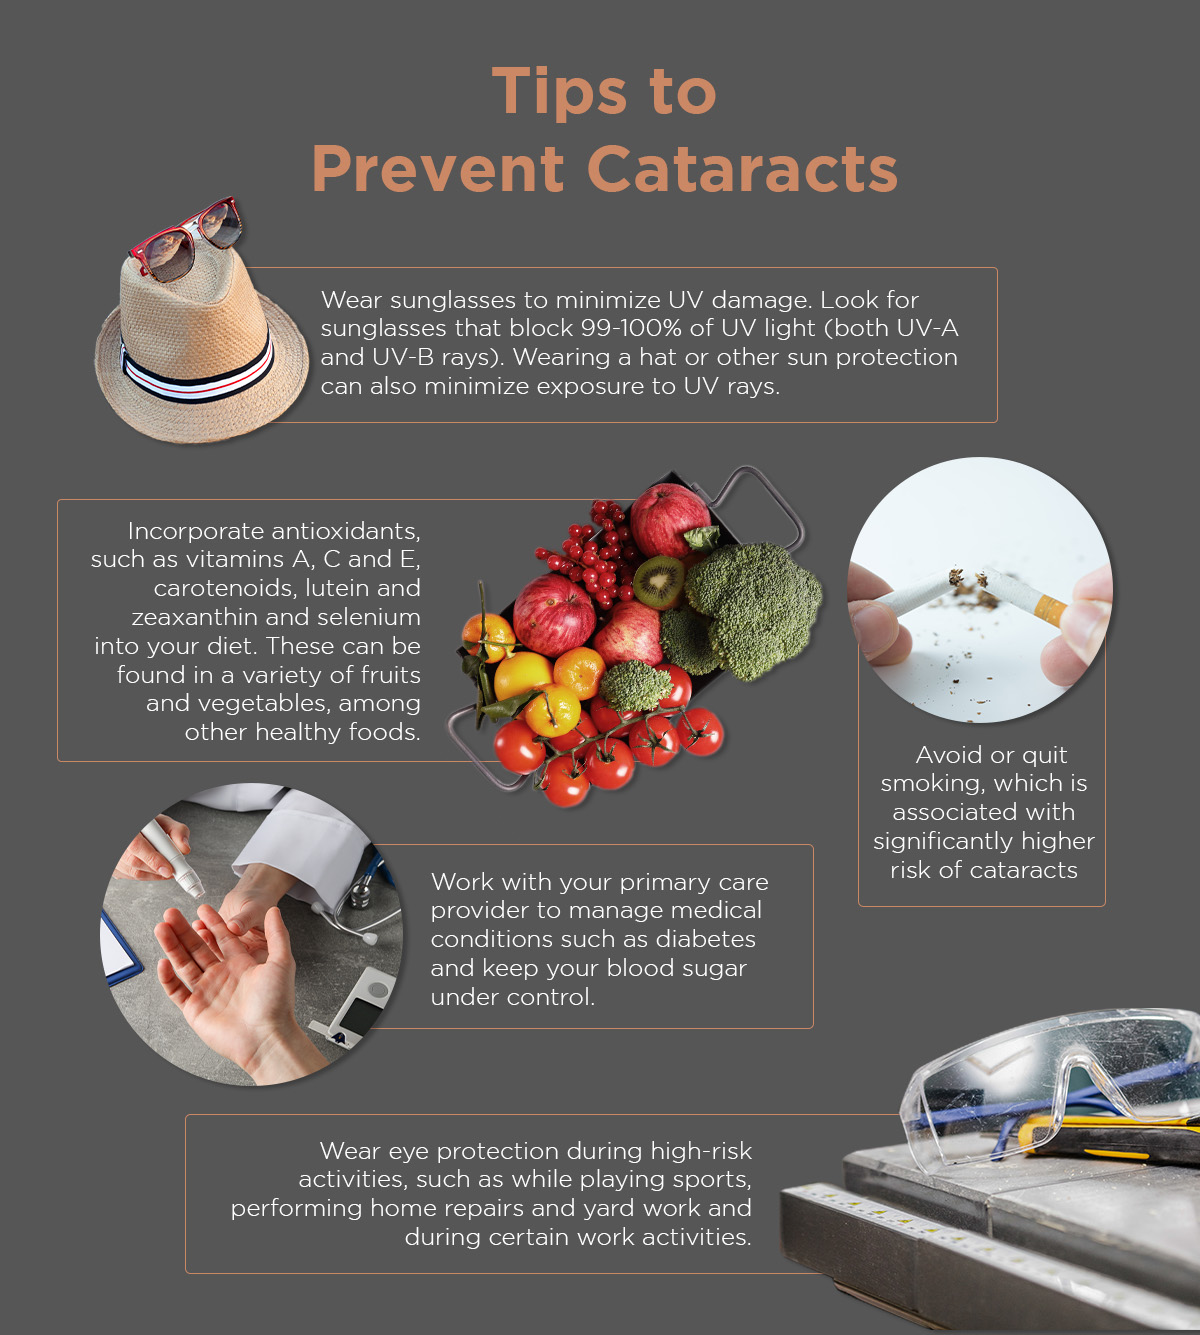 Tips to Prevent Cataract